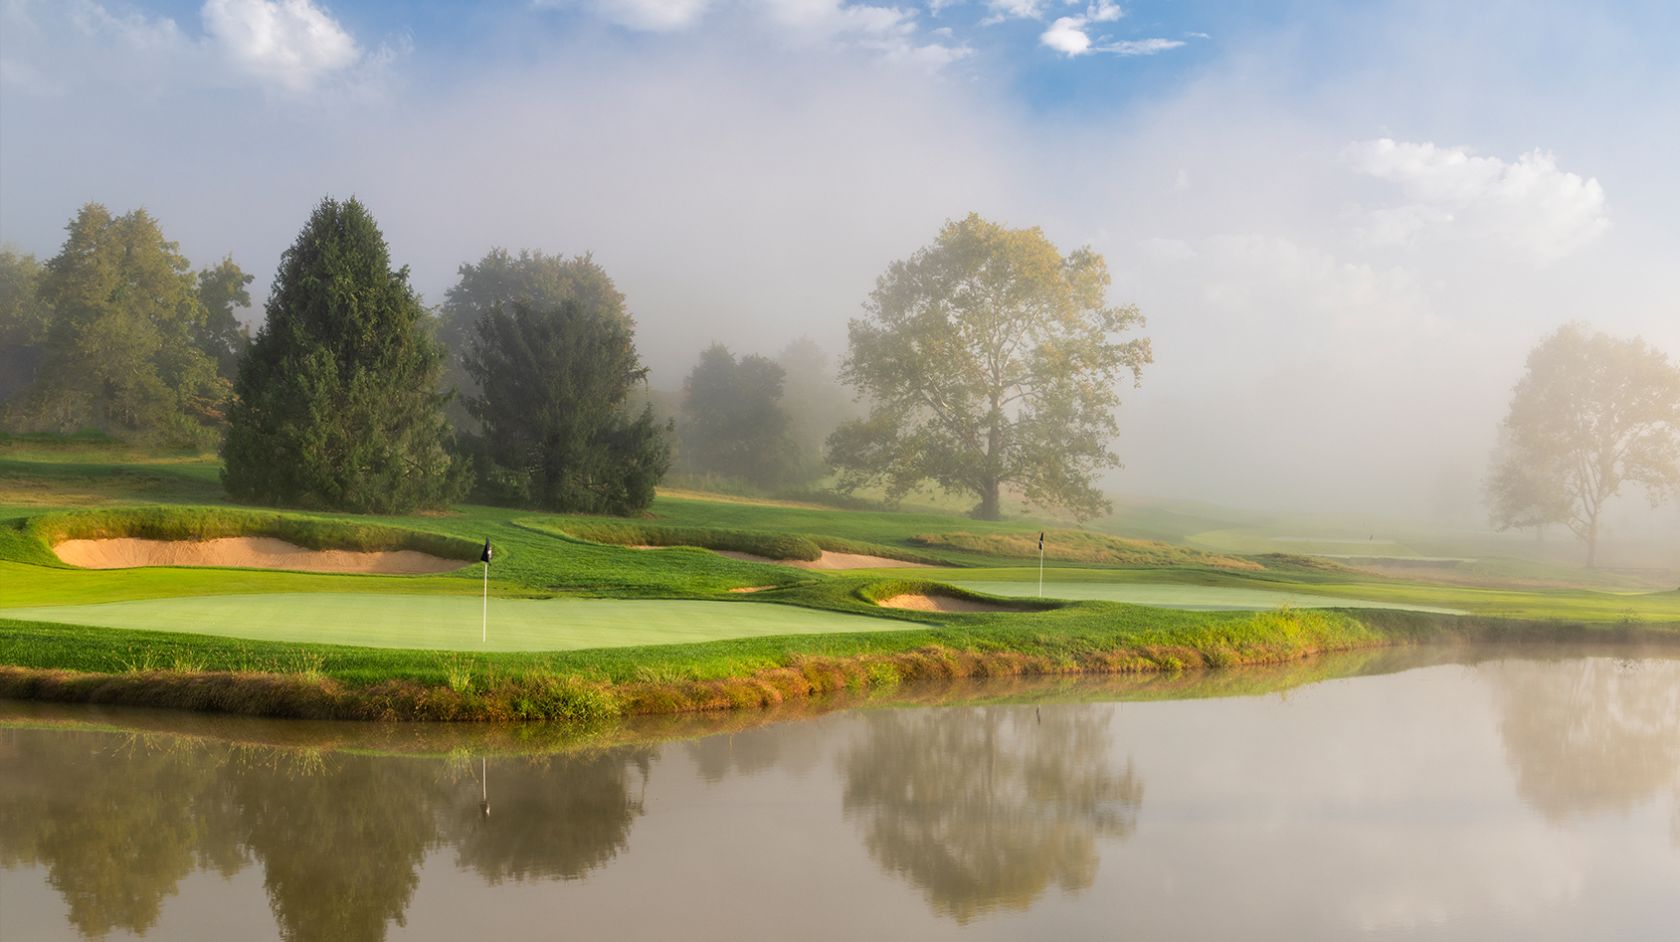 Par-3 Course with morning fog